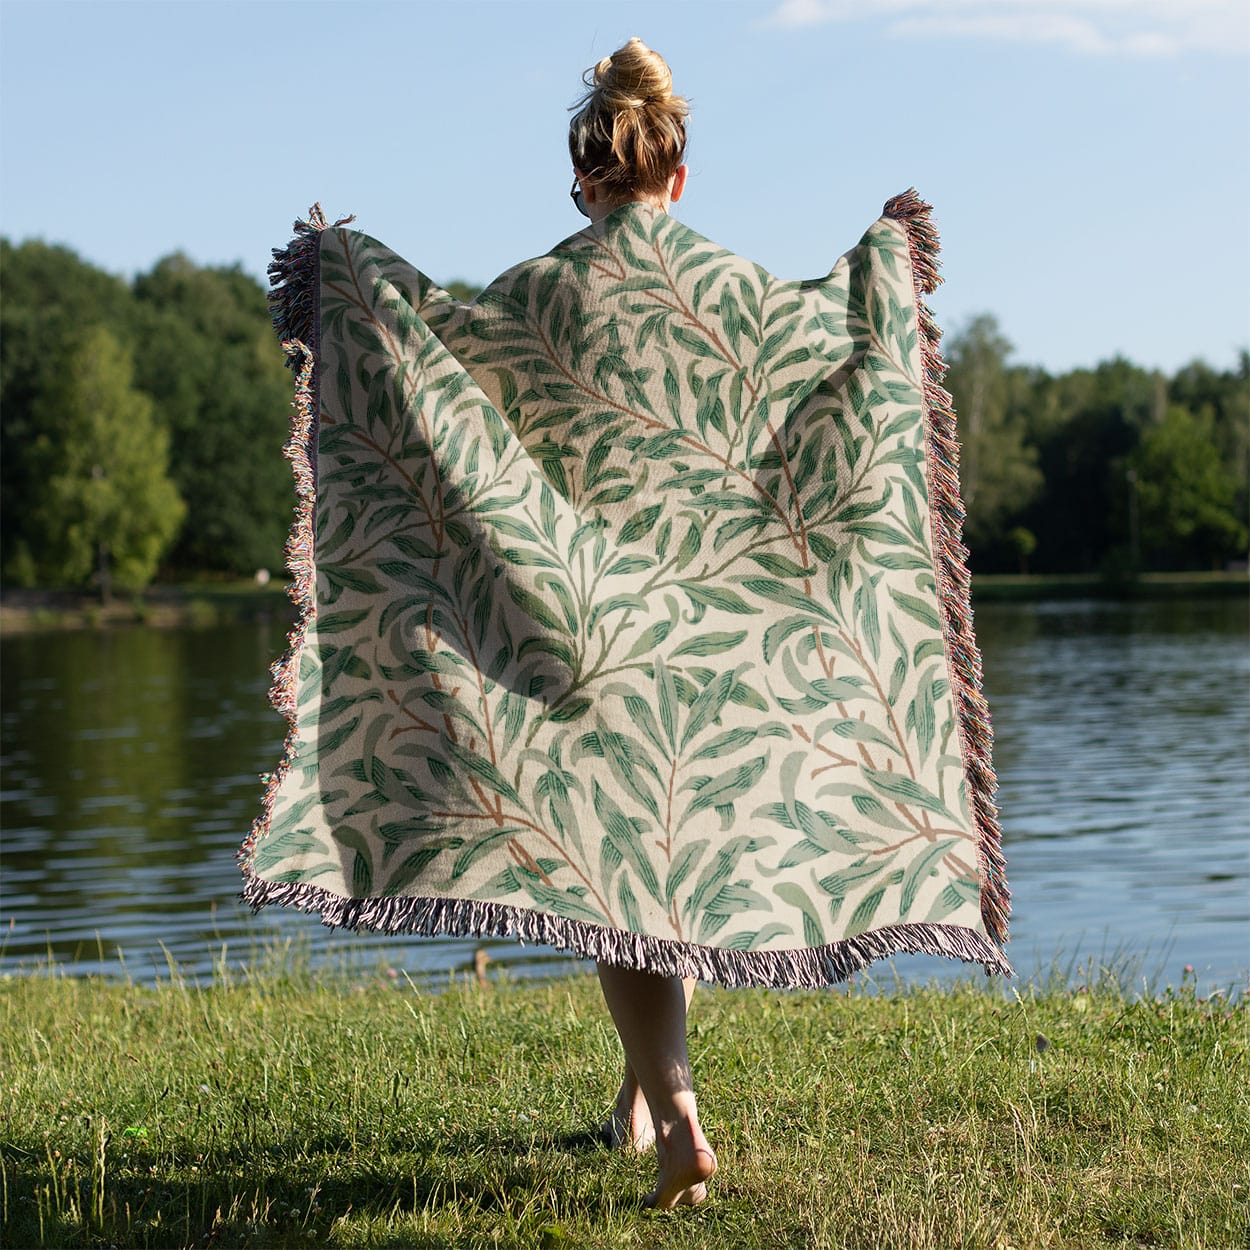 Green Leaf Woven Blanket Held on a Woman's Back Outside